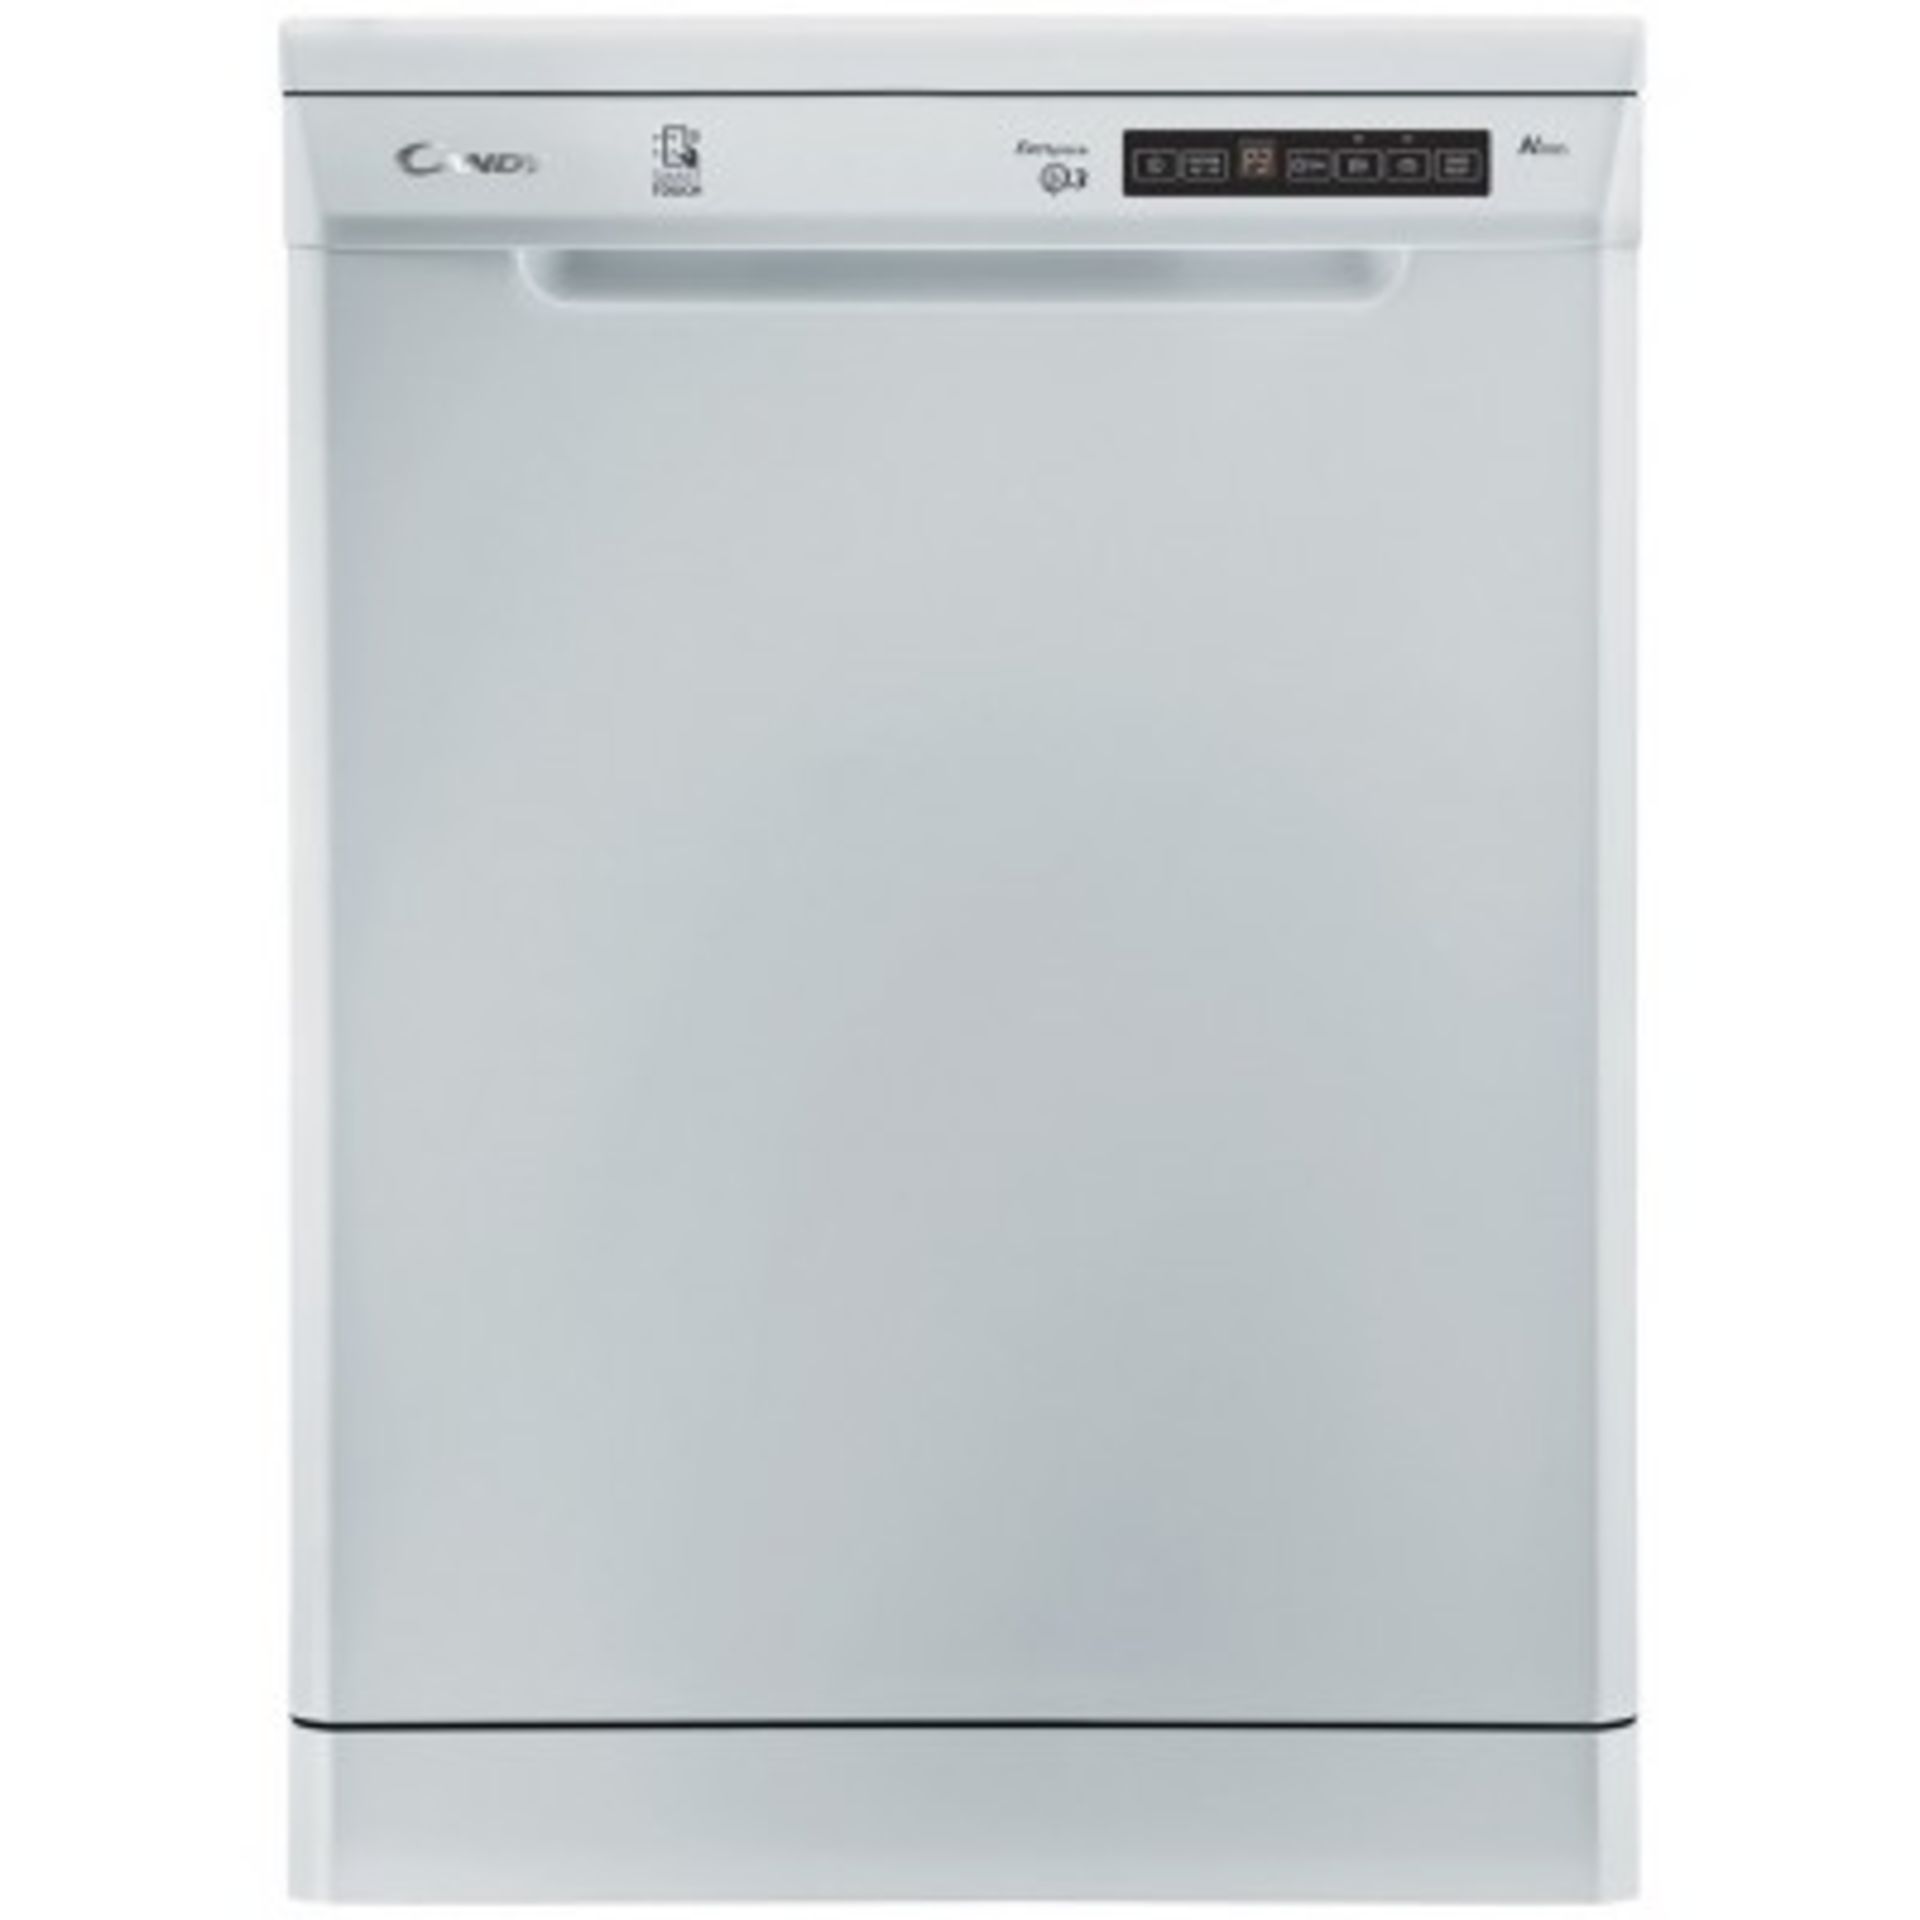 + VAT Grade A/B Candy CDP 1DS39W Full Size Dishwasher - Smart Touch Technology - 24 Minute Rapid